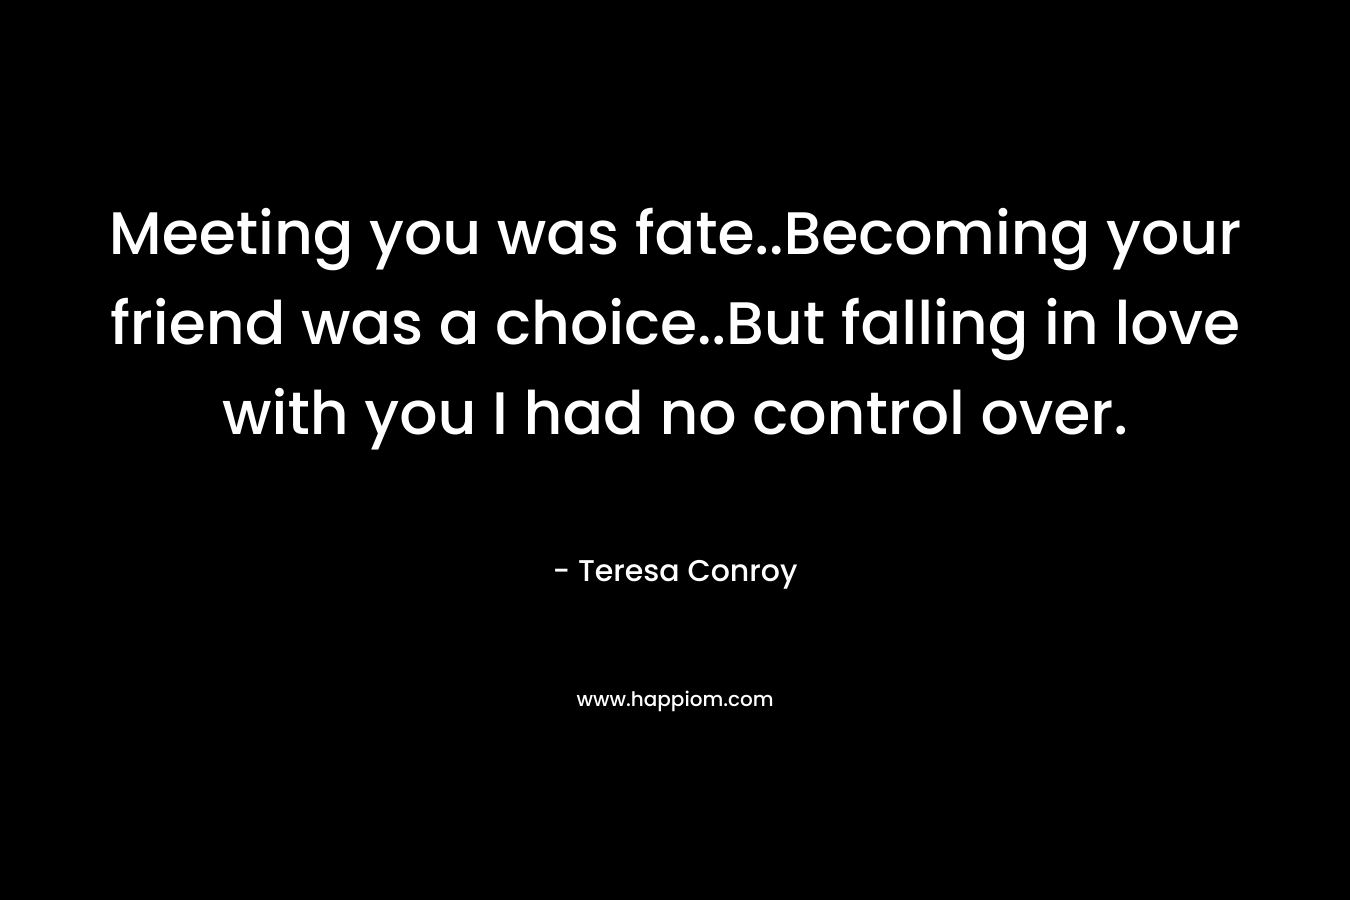 Meeting you was fate..Becoming your friend was a choice..But falling in love with you I had no control over. – Teresa Conroy